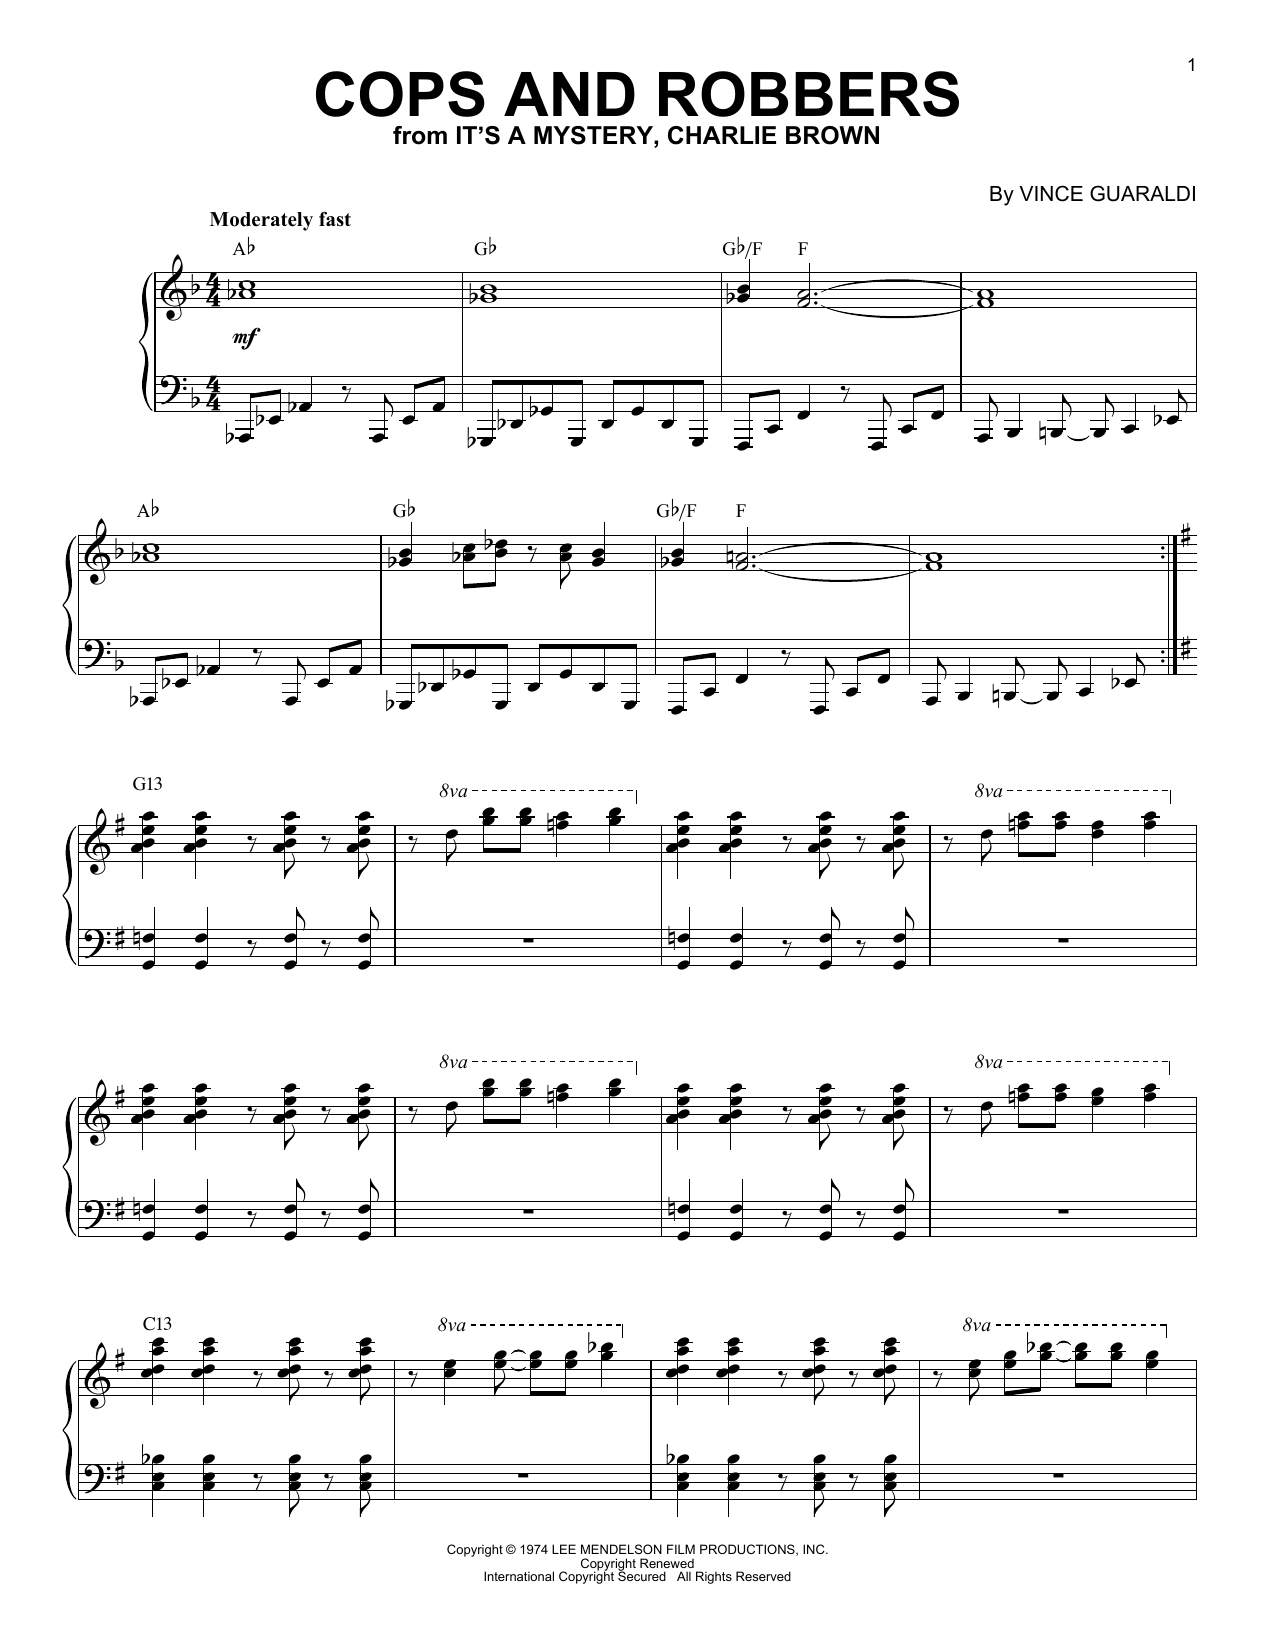 Download Vince Guaraldi Cops And Robbers Sheet Music